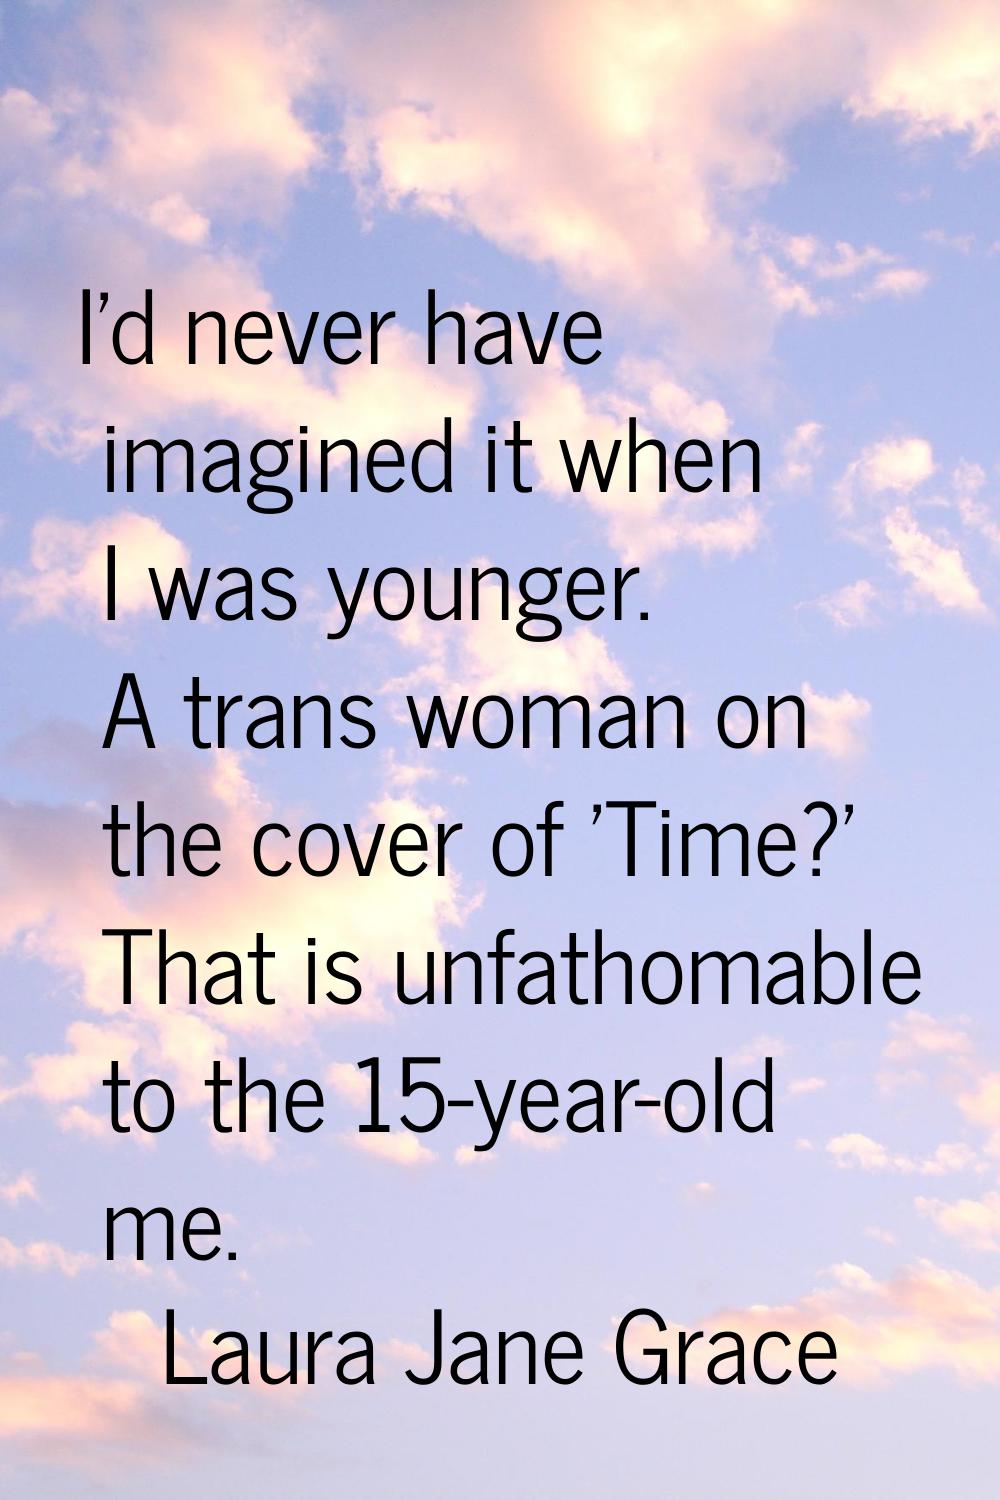 I'd never have imagined it when I was younger. A trans woman on the cover of 'Time?' That is unfath